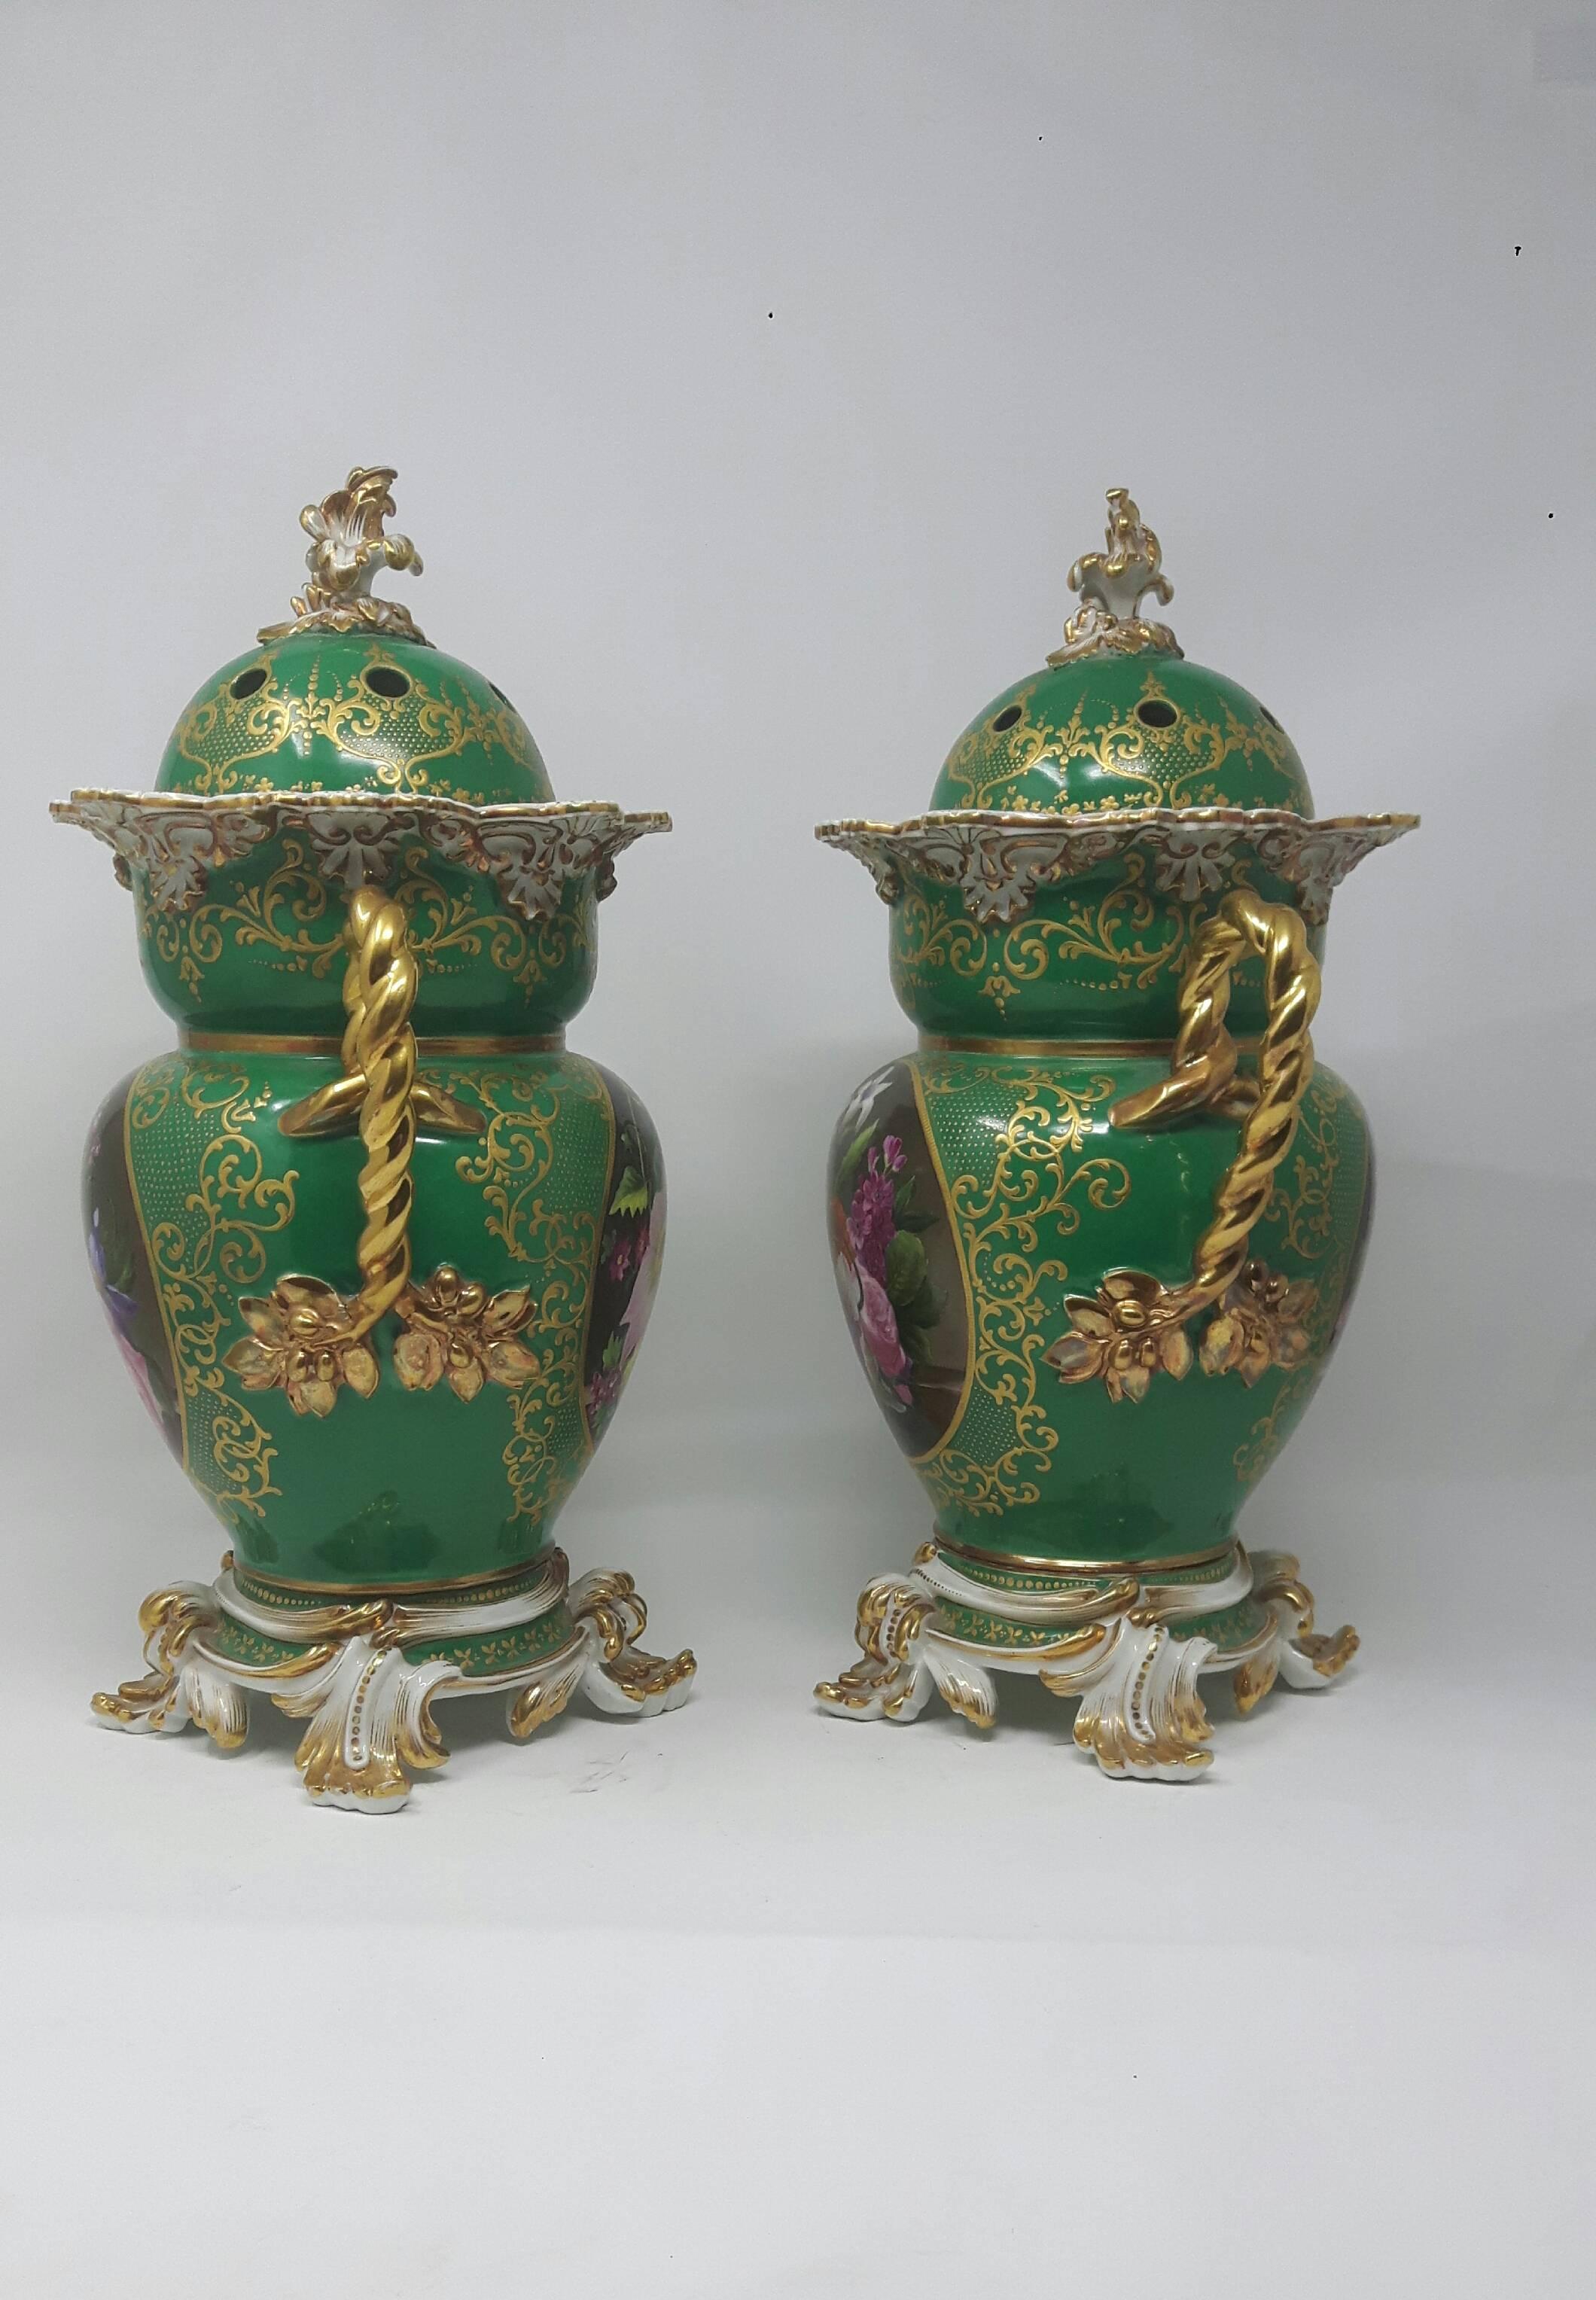 A very impressive pair of Minton vases hand-painted with cartouches of flowers on a green background. The rope twisted handles are gilt and the domed lids perforated reminiscent of 18th century pot pourri vases 


  